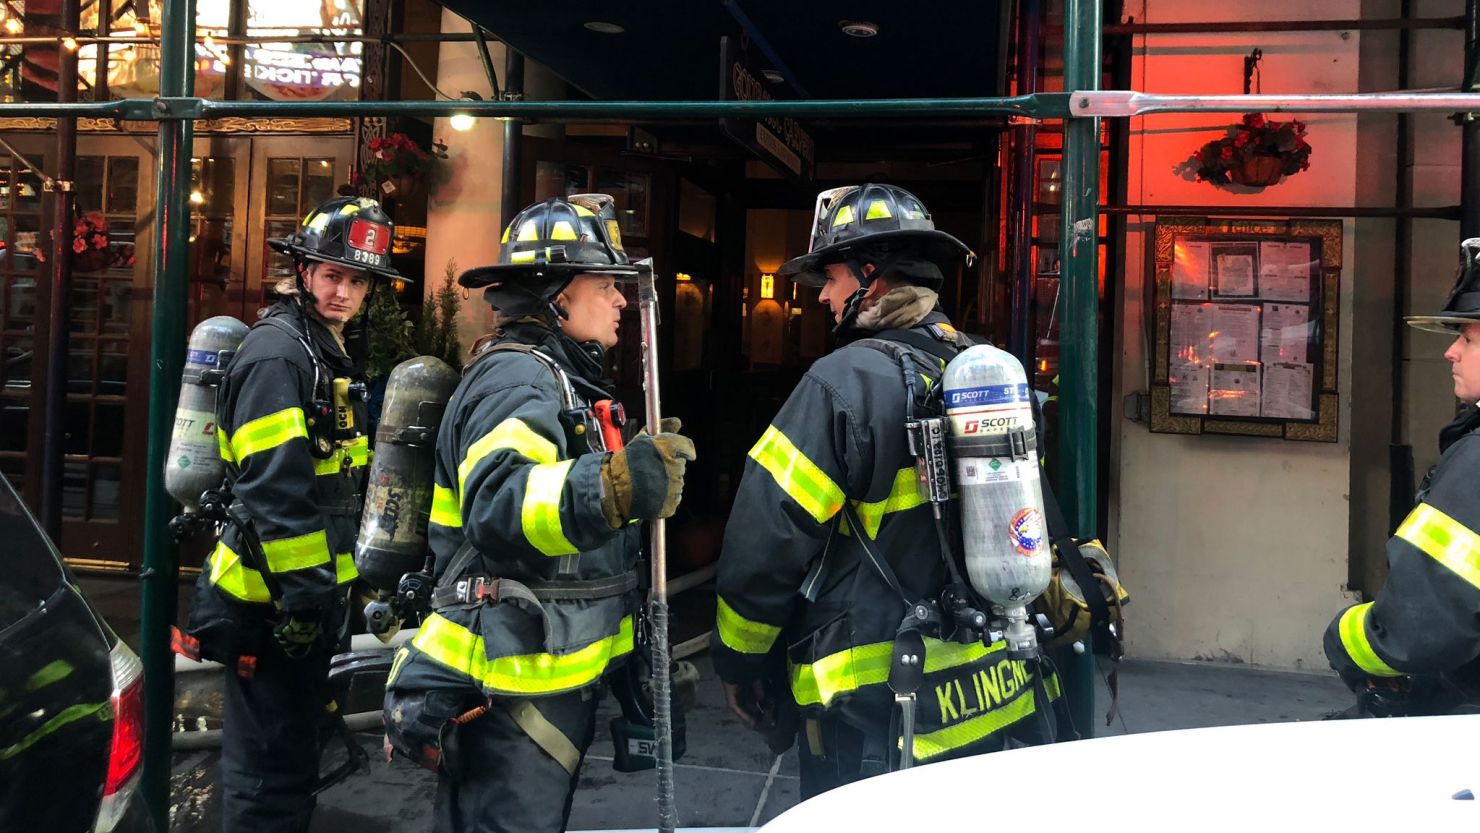 Firefighters respond to a fire near Times Square in Manhattan on Sunday.